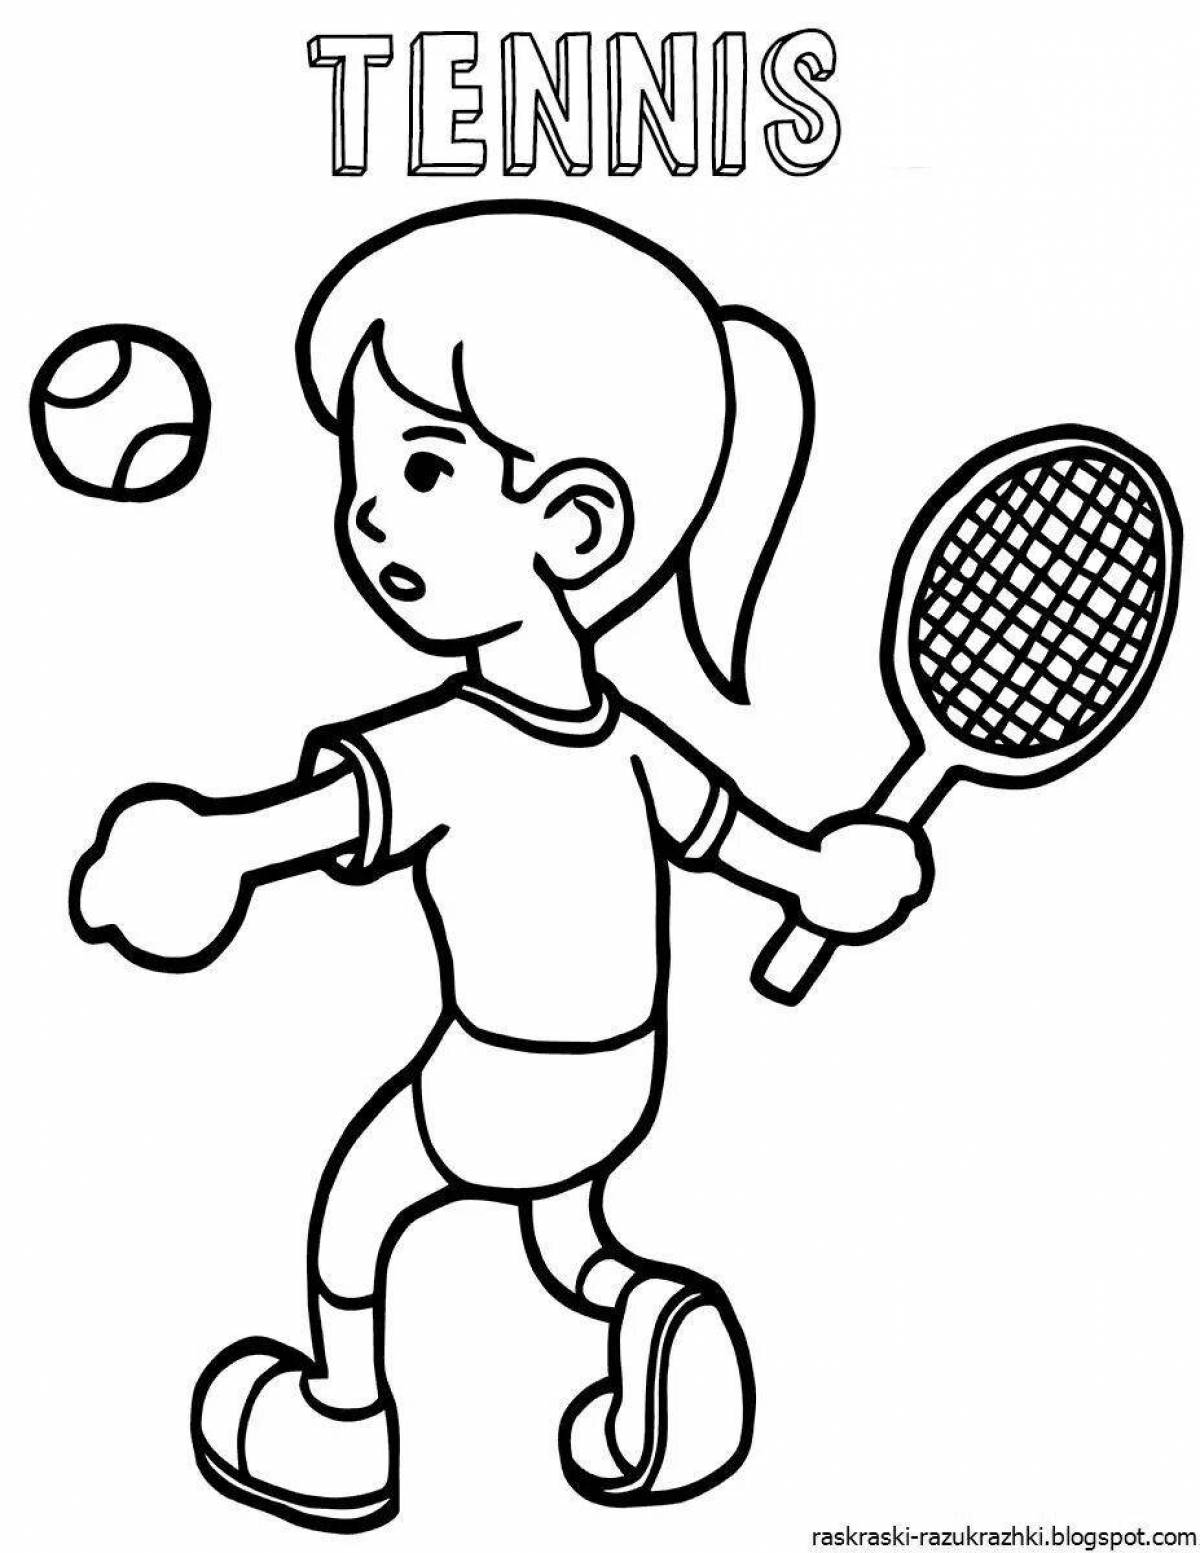 Adorable sports coloring book for kids 5-6 years old